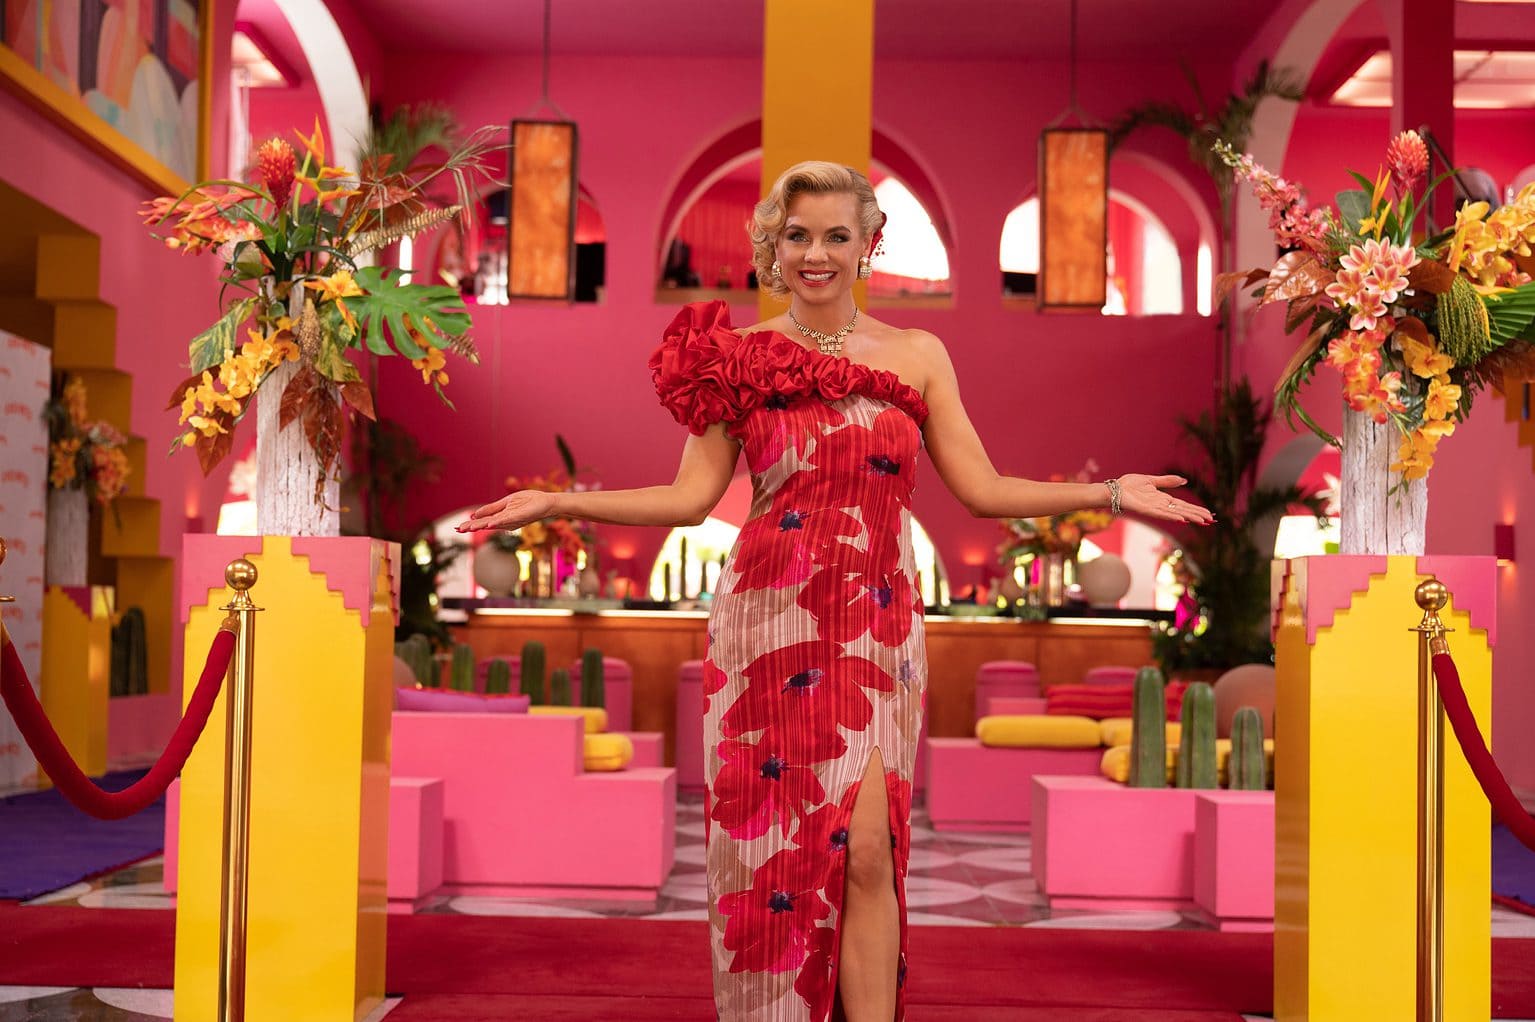 Acapulco recap Apple TV+: Just when it seemed like the show was ready to break free of its sitcom bindings, a hopelessly frothy episode ensues.